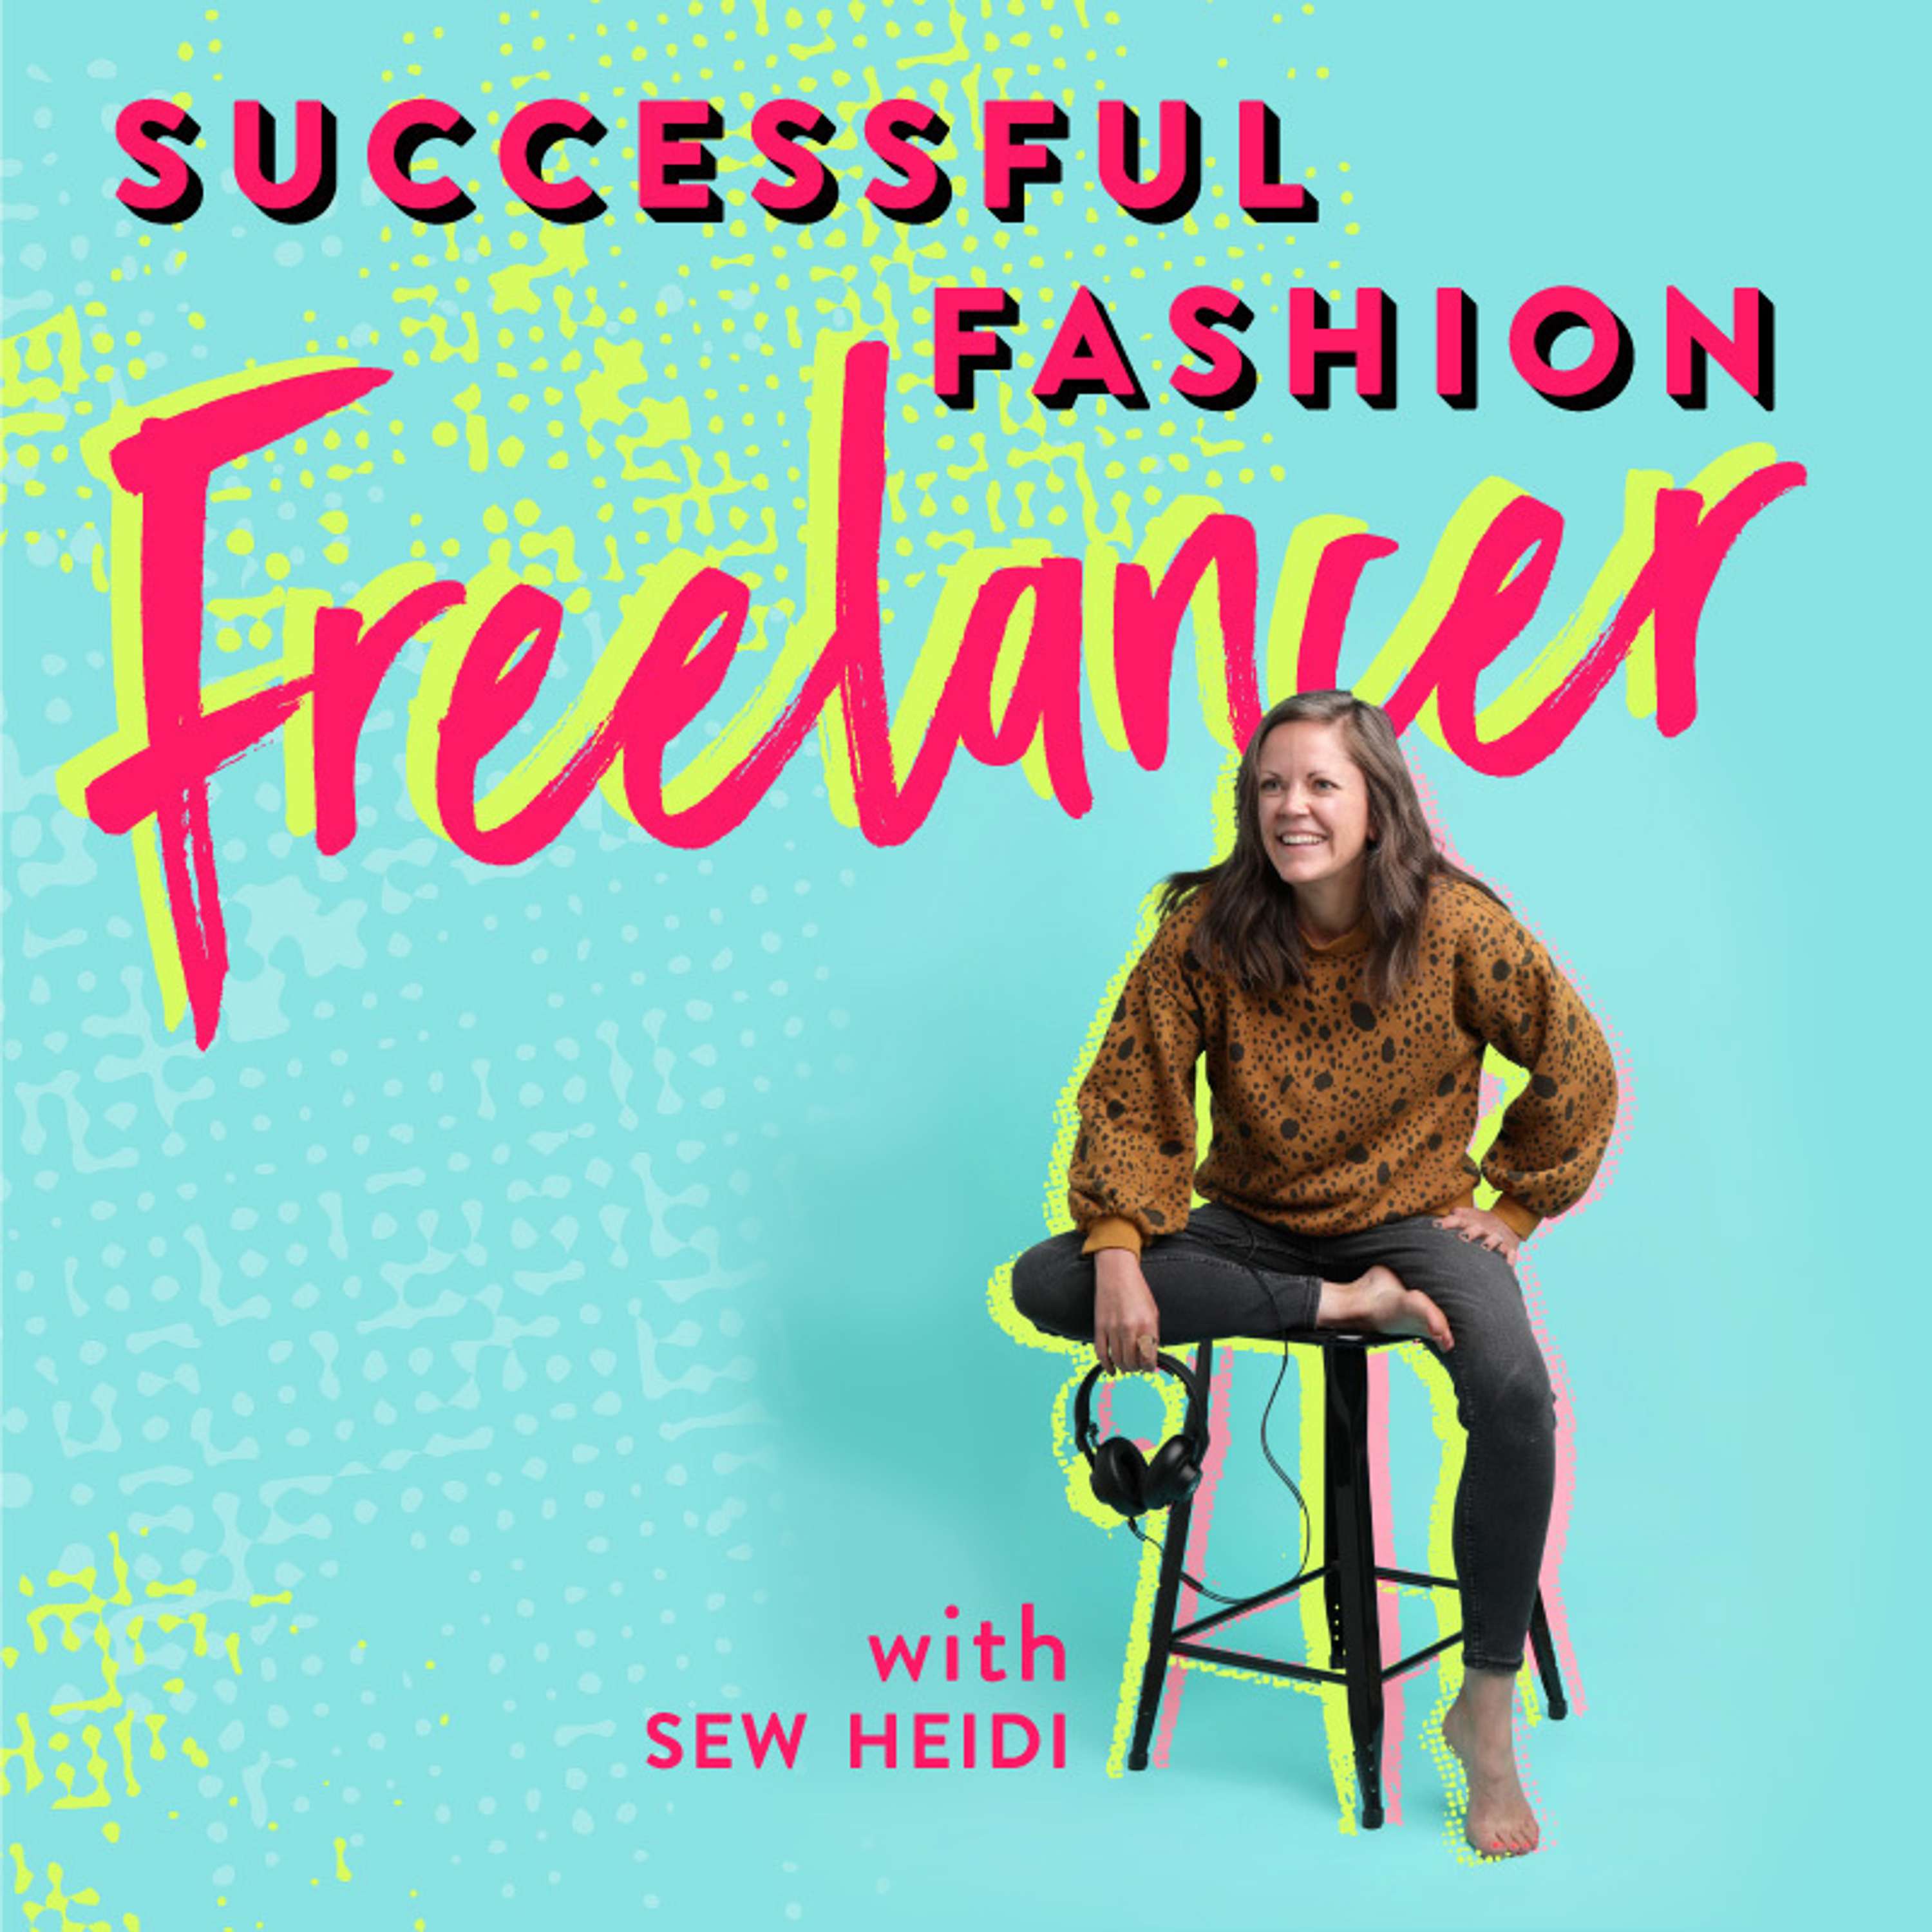 SFF173: Fashion Freelancer Q&A: How to Ask for Referrals to Get Consistent Income